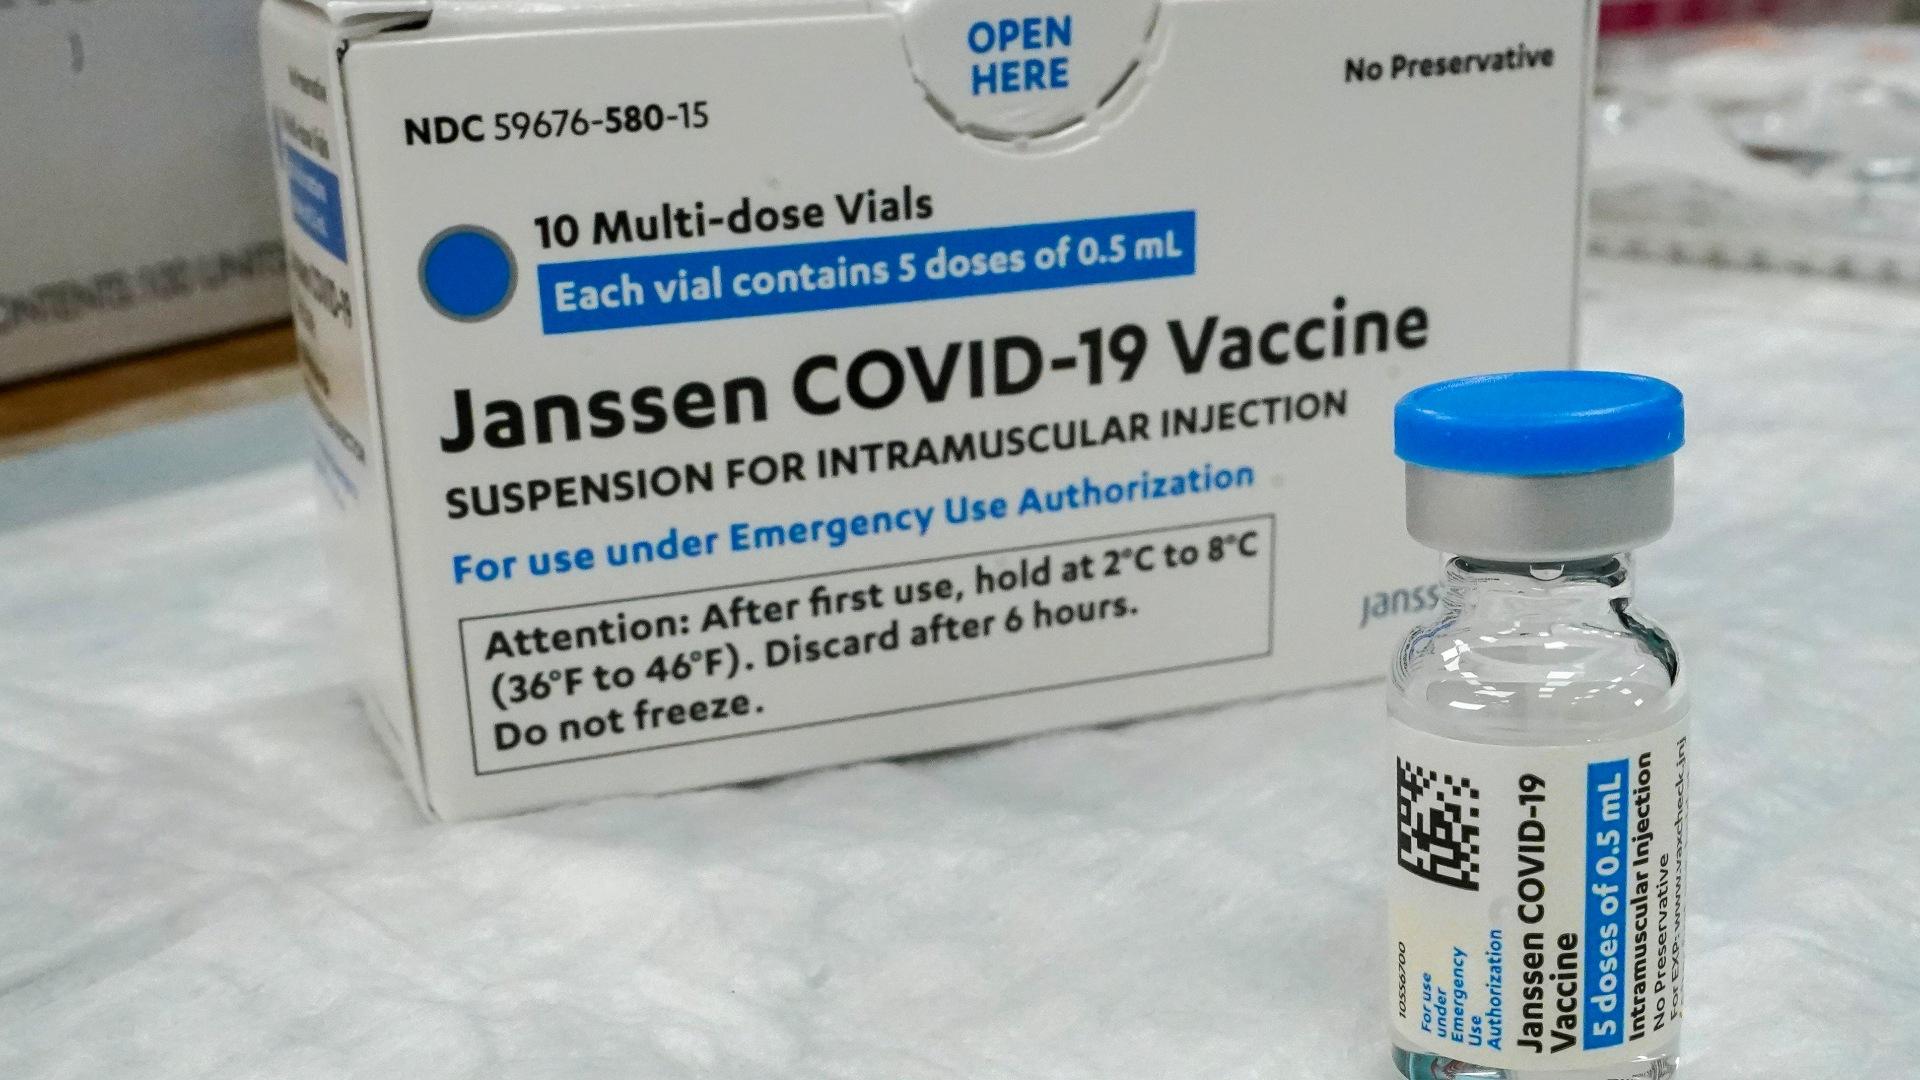 In this April 8, 2021 file photo, the Johnson & Johnson COVID-19 vaccine is seen at a pop up vaccination site in the Staten Island borough of New York. (AP Photo / Mary Altaffer, File)